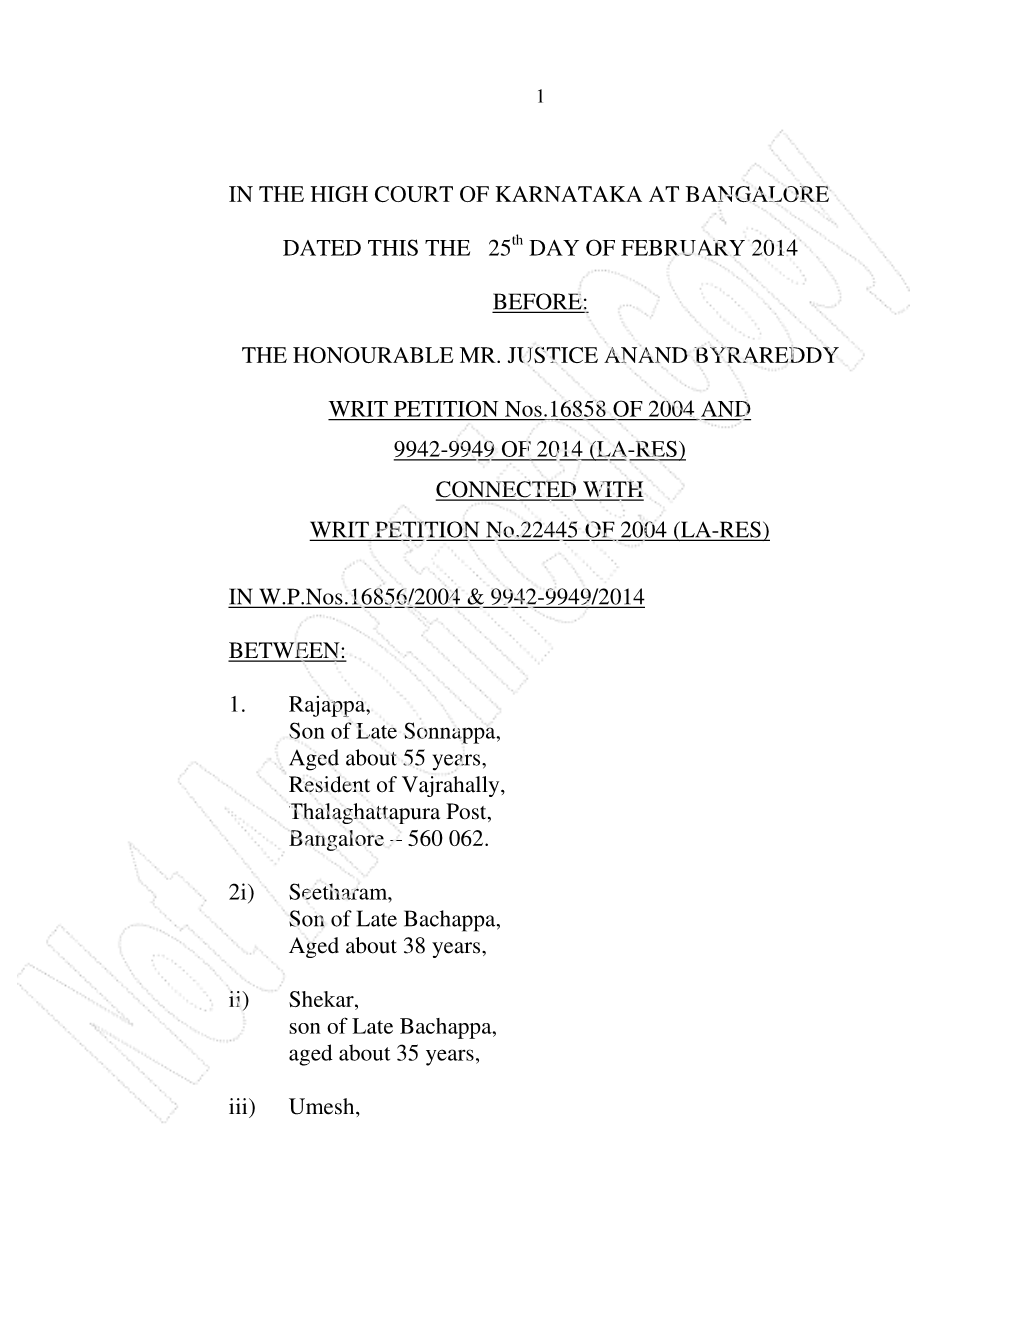 In the High Court of Karnataka at Bangalore Dated This the 25 Day of February 2014 Before: the Honourable Mr. Justice Anand By